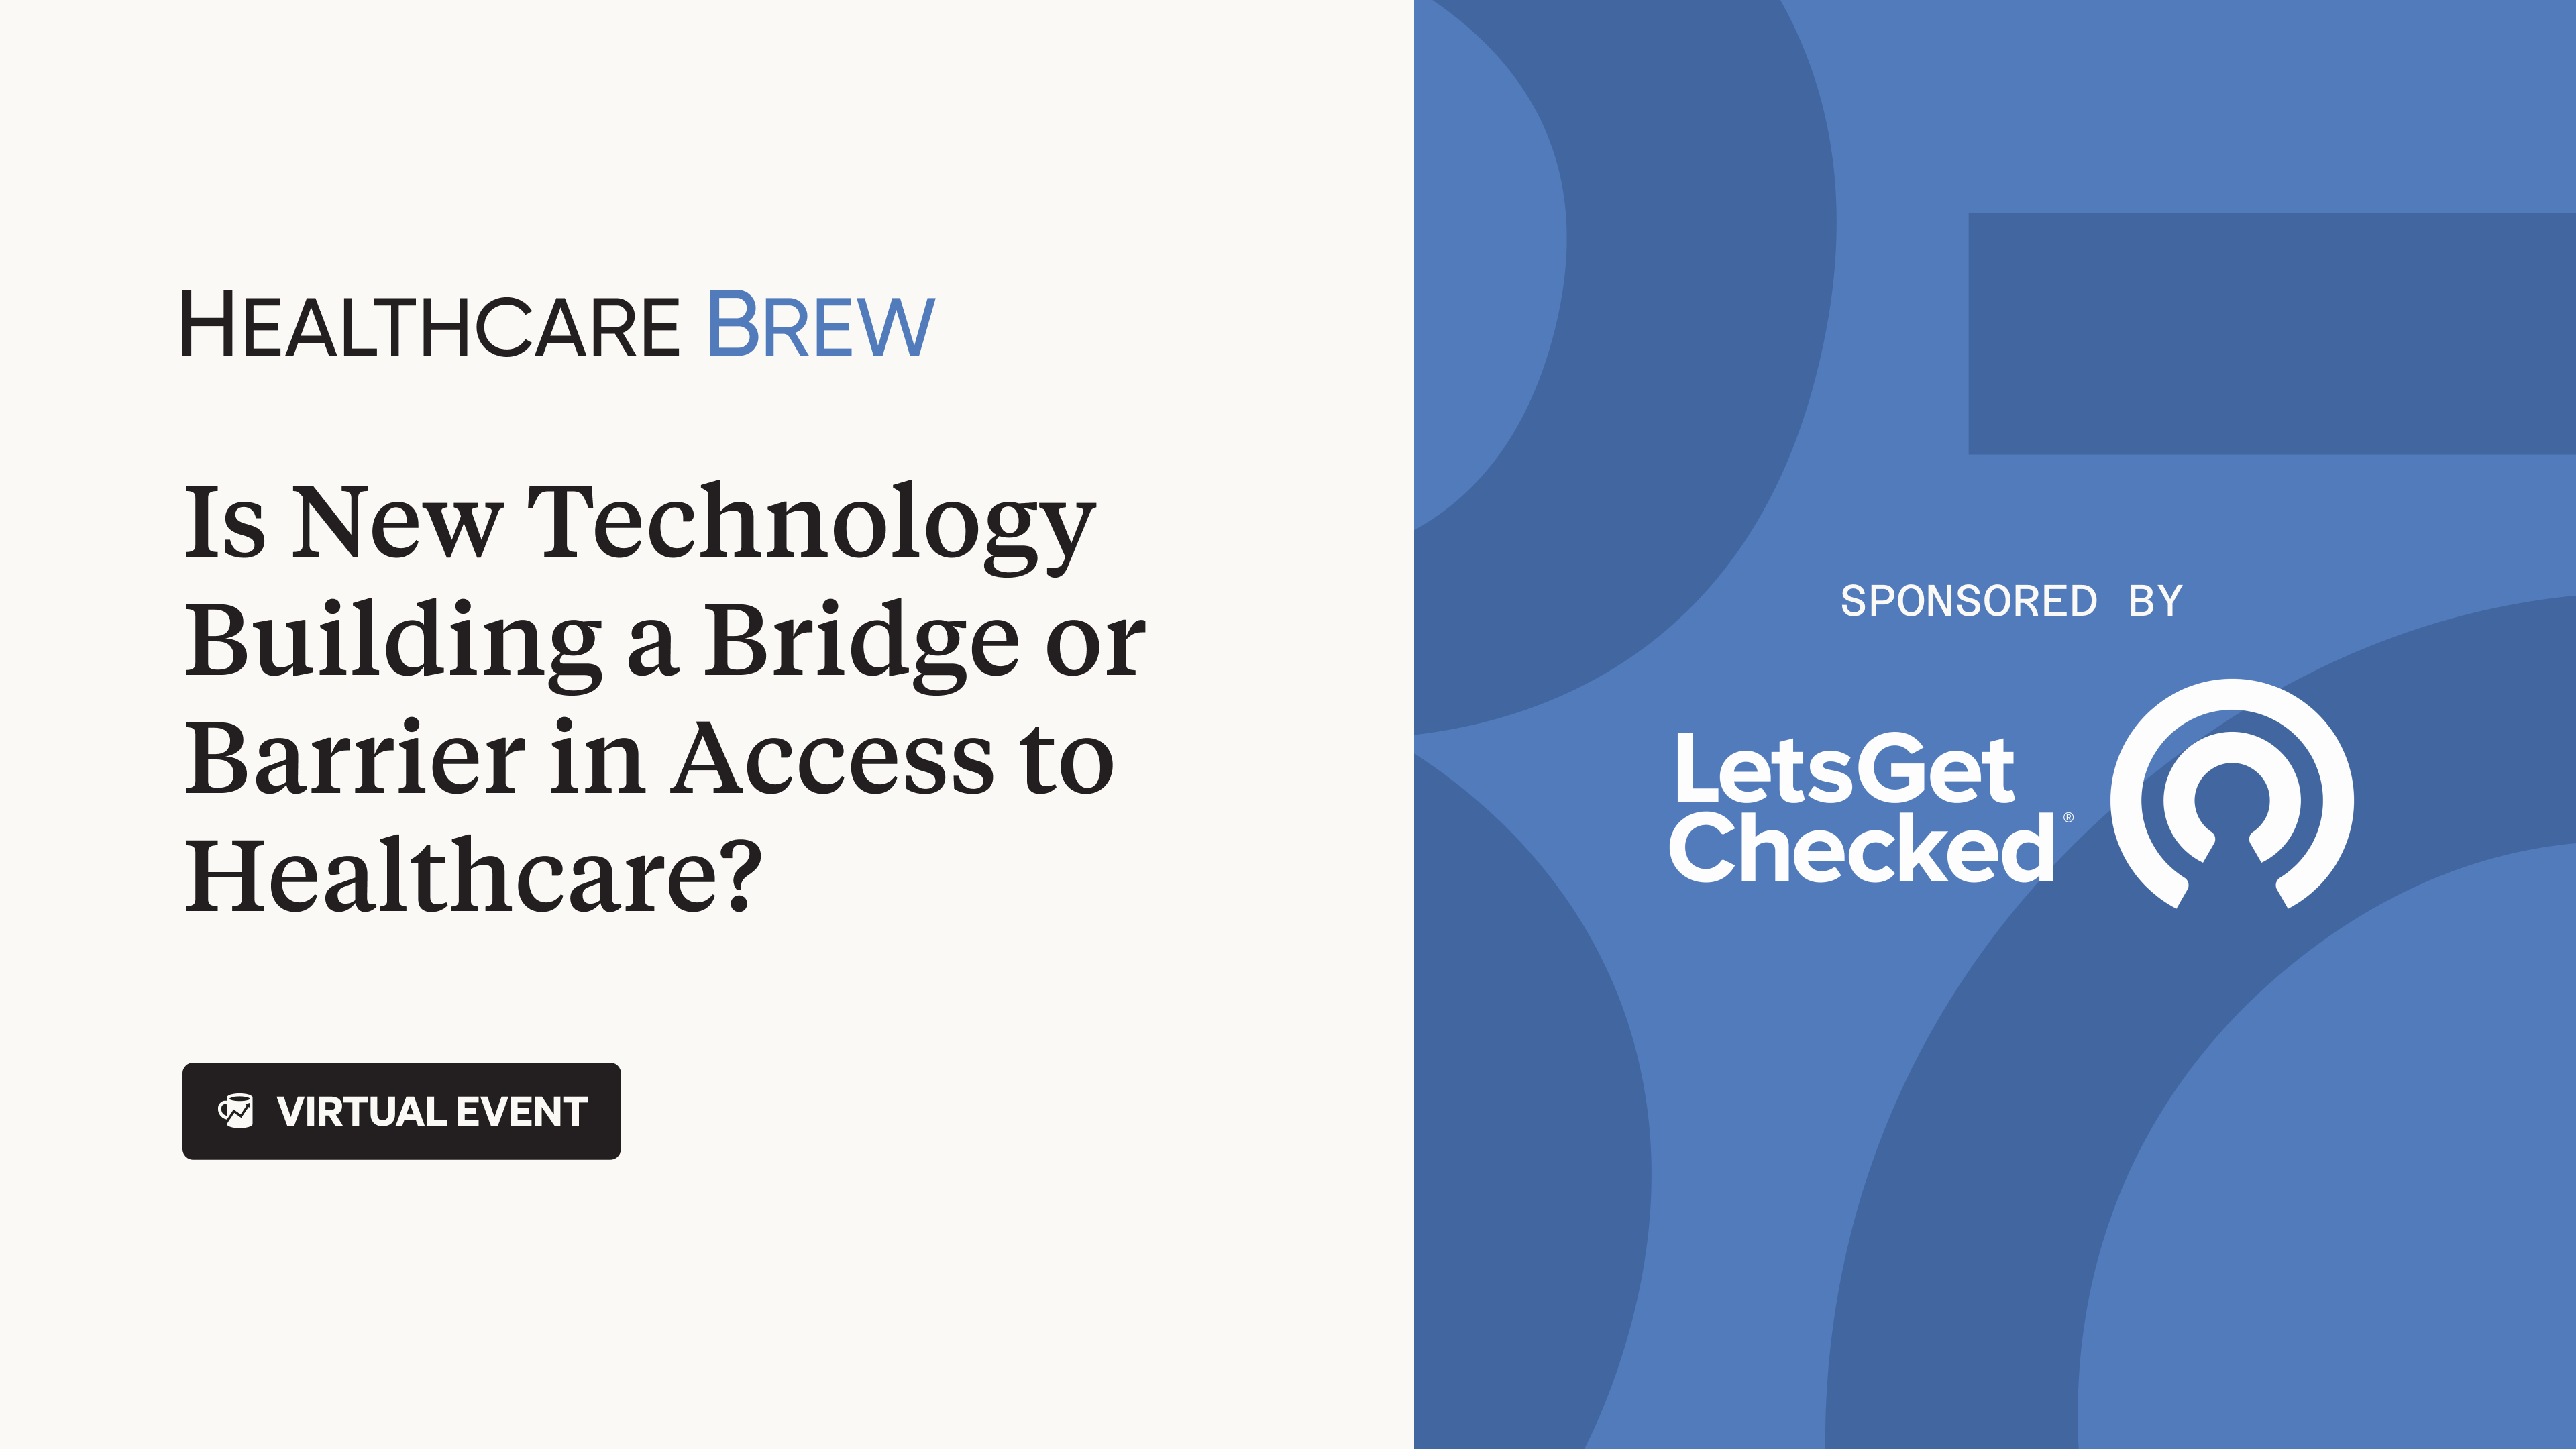 Healthcare Brew virtual event “Is New Technology Building a Bridge or Barrier in Access to Healthcare?” Sponsored by LetsGetChecked